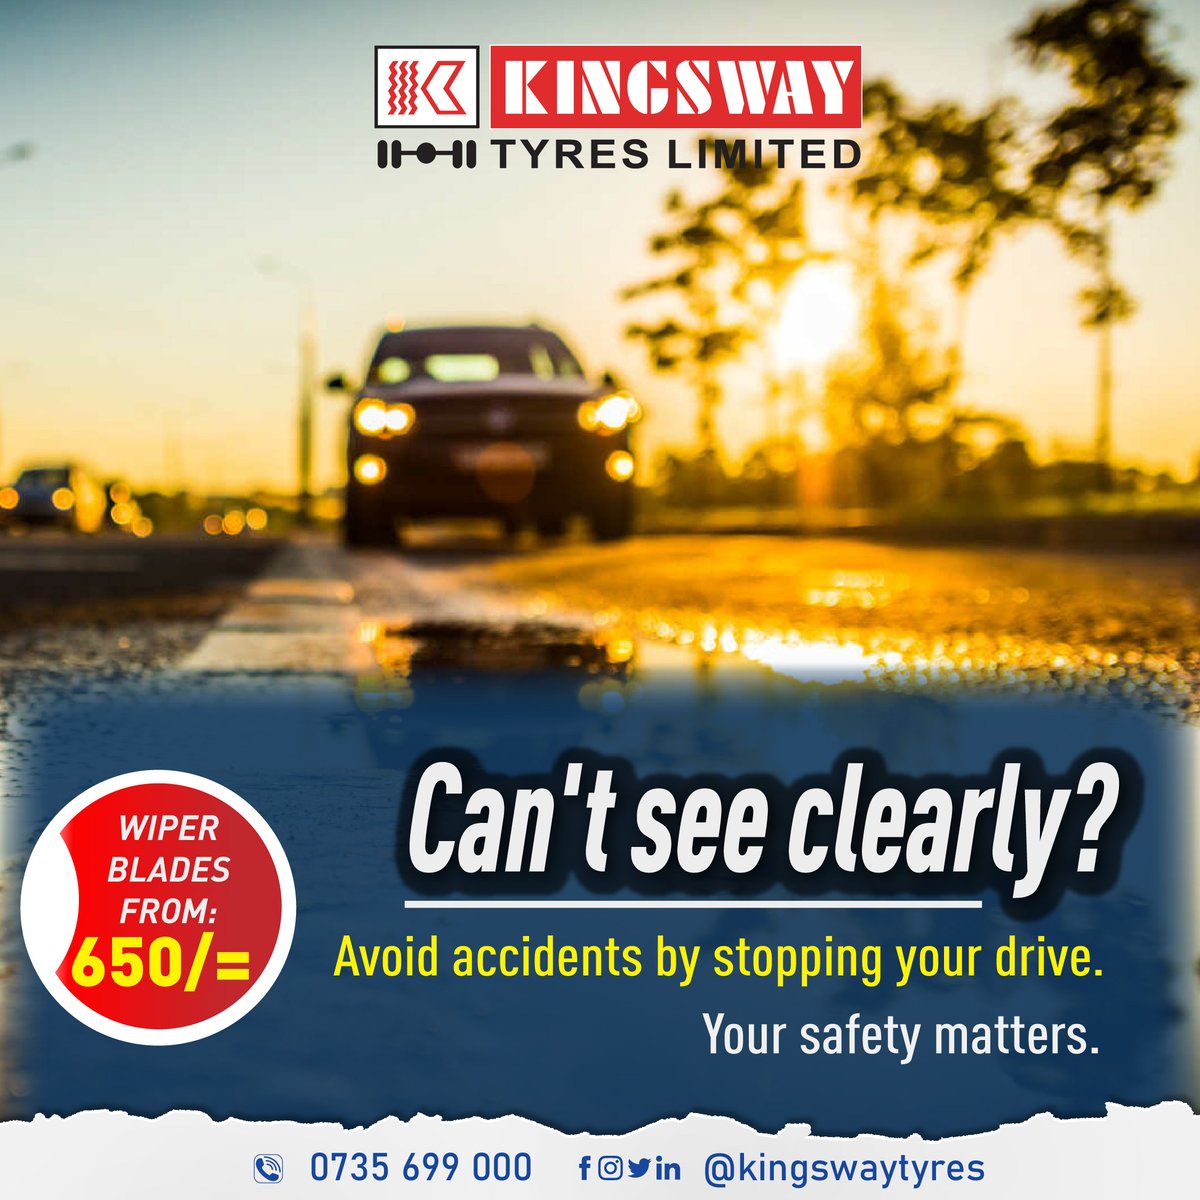 Keep your vision crystal clear for a safer journey on the road! Whether rain or shine, clear vision is essential for safe driving. Don't let anything blur your focus behind the wheel.

CALL/WHATSAPP: 0735 699 000
#kingsway
#cars
#tyres
#safetytips